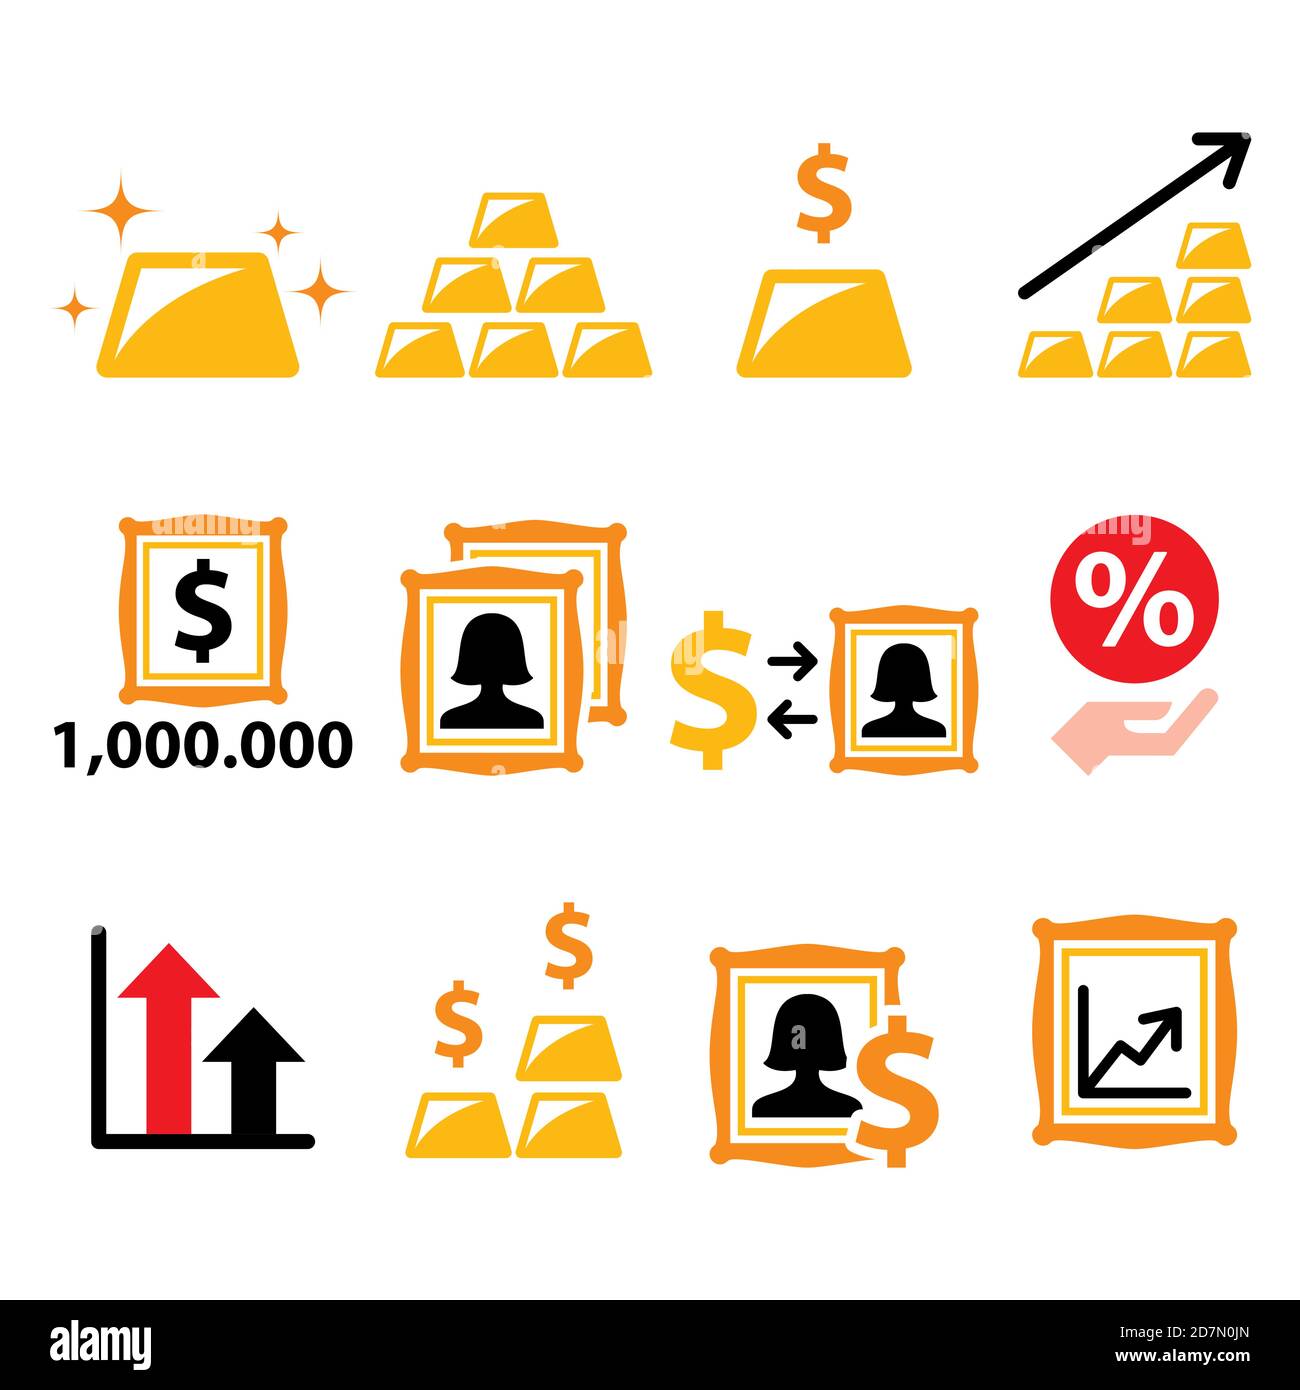 Alternative investments - investing money in gold and art, finance vector icons set Stock Vector